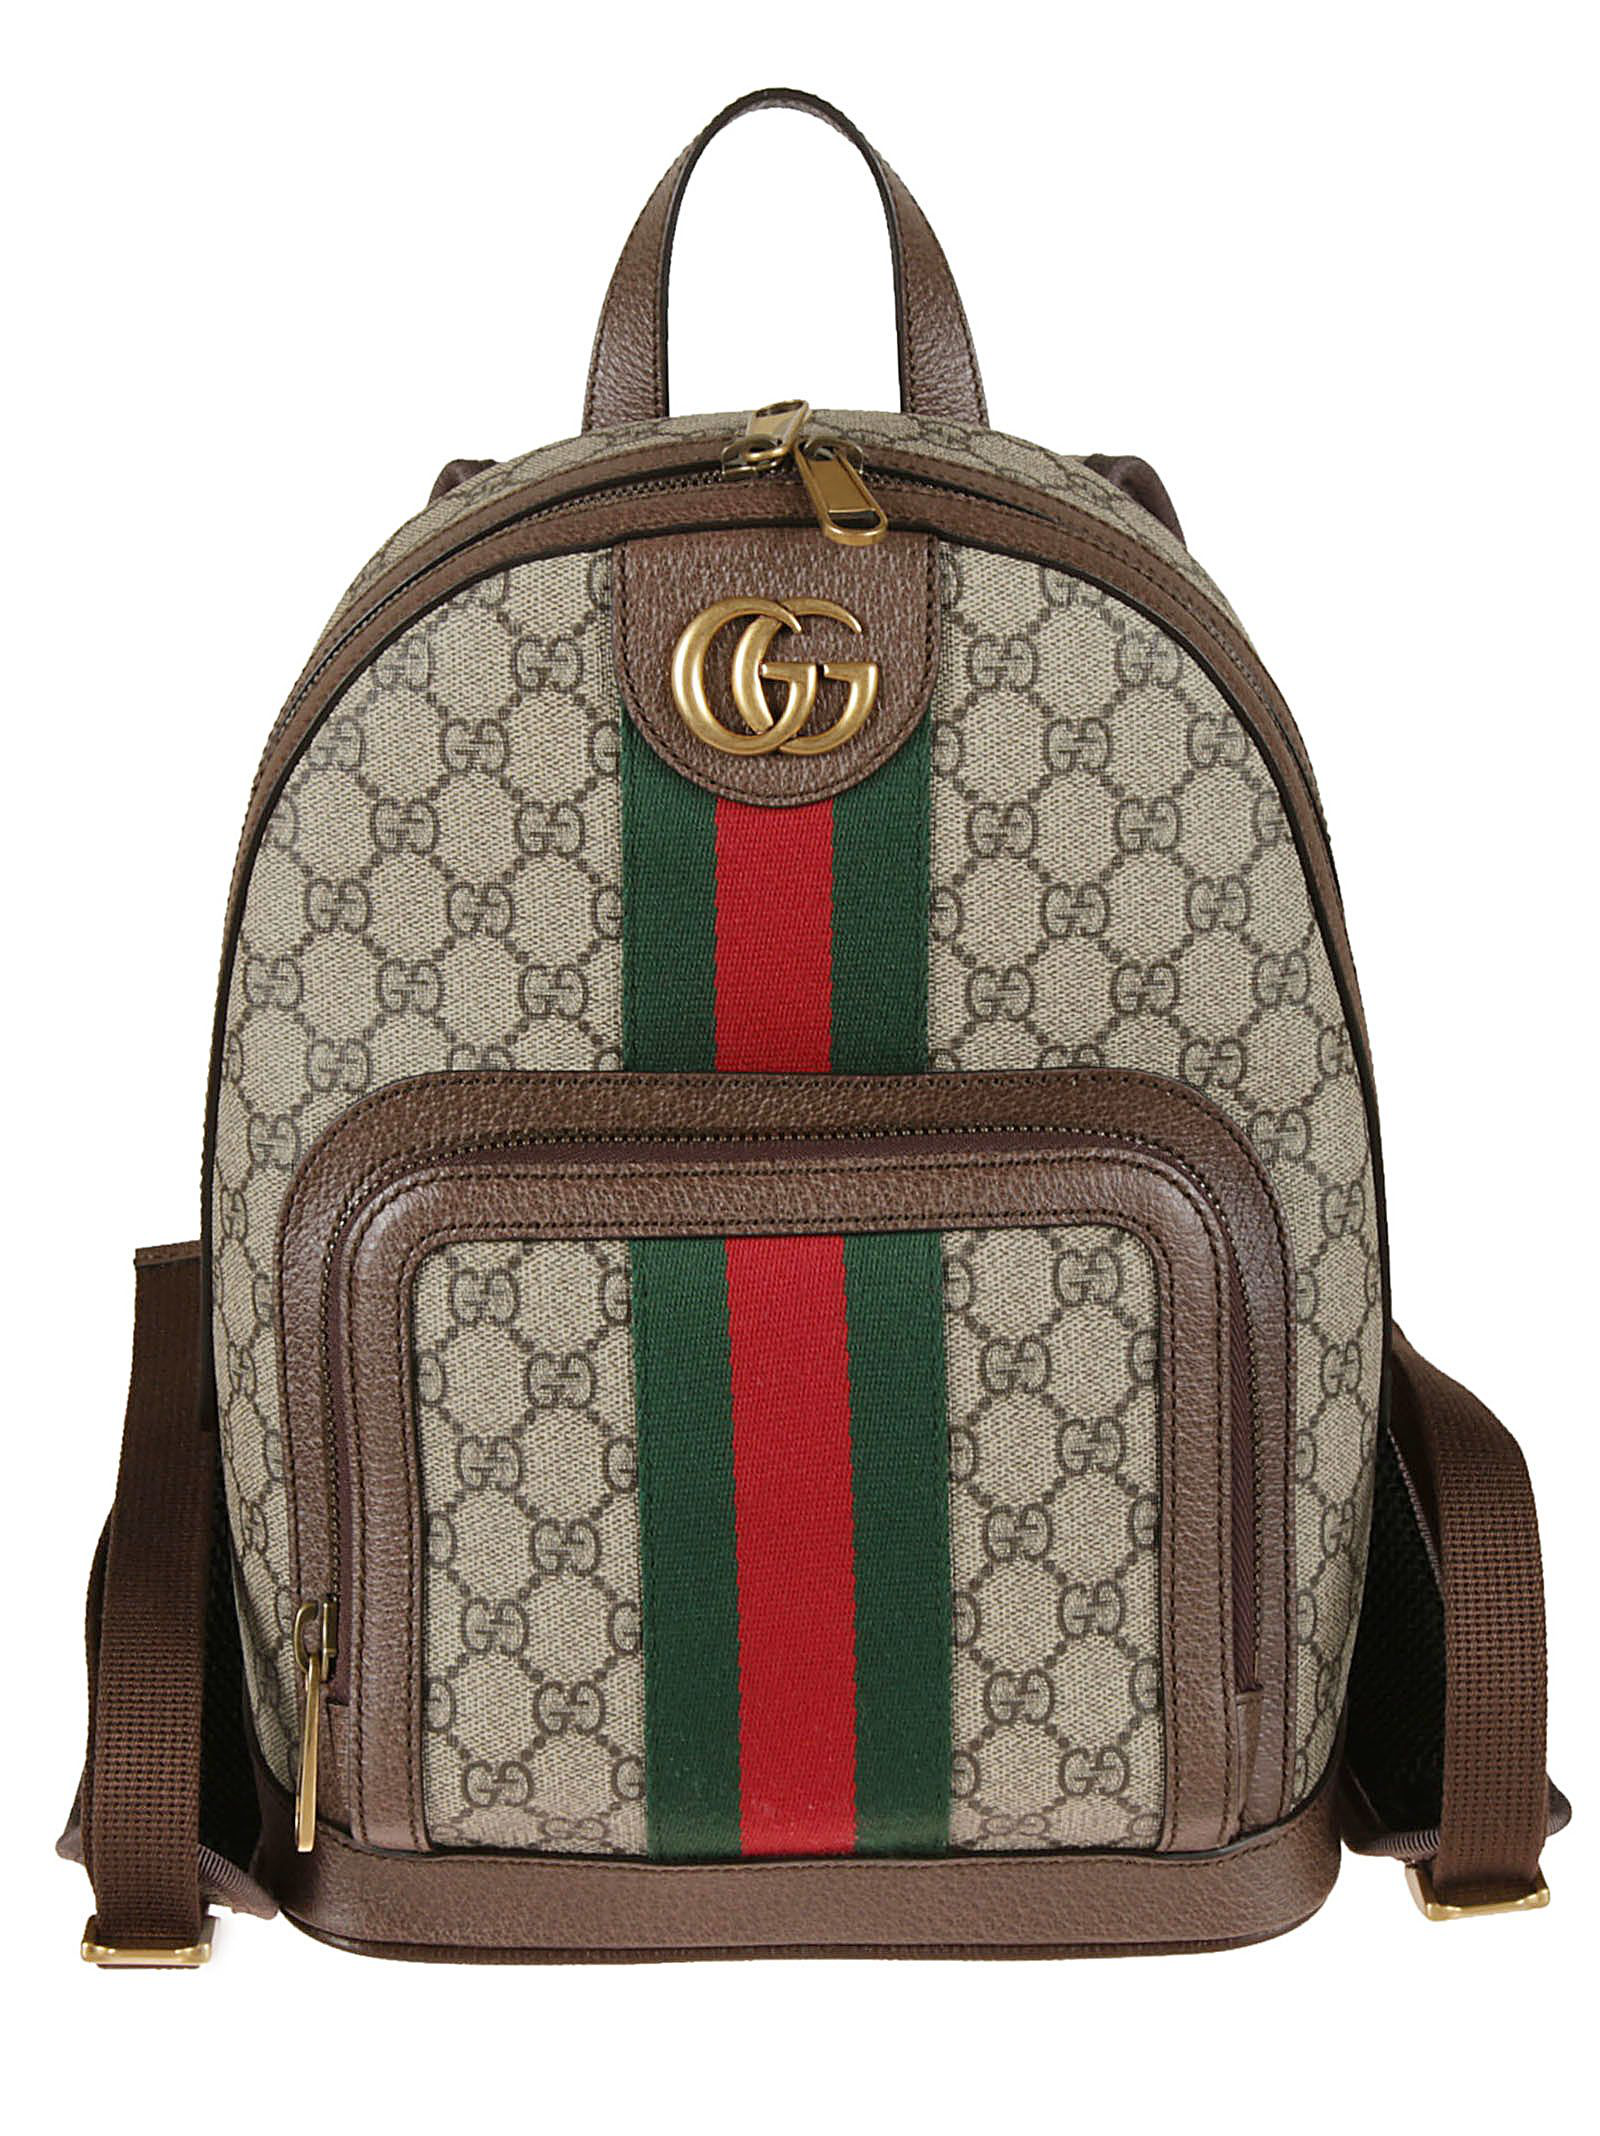 gucci small backpack price